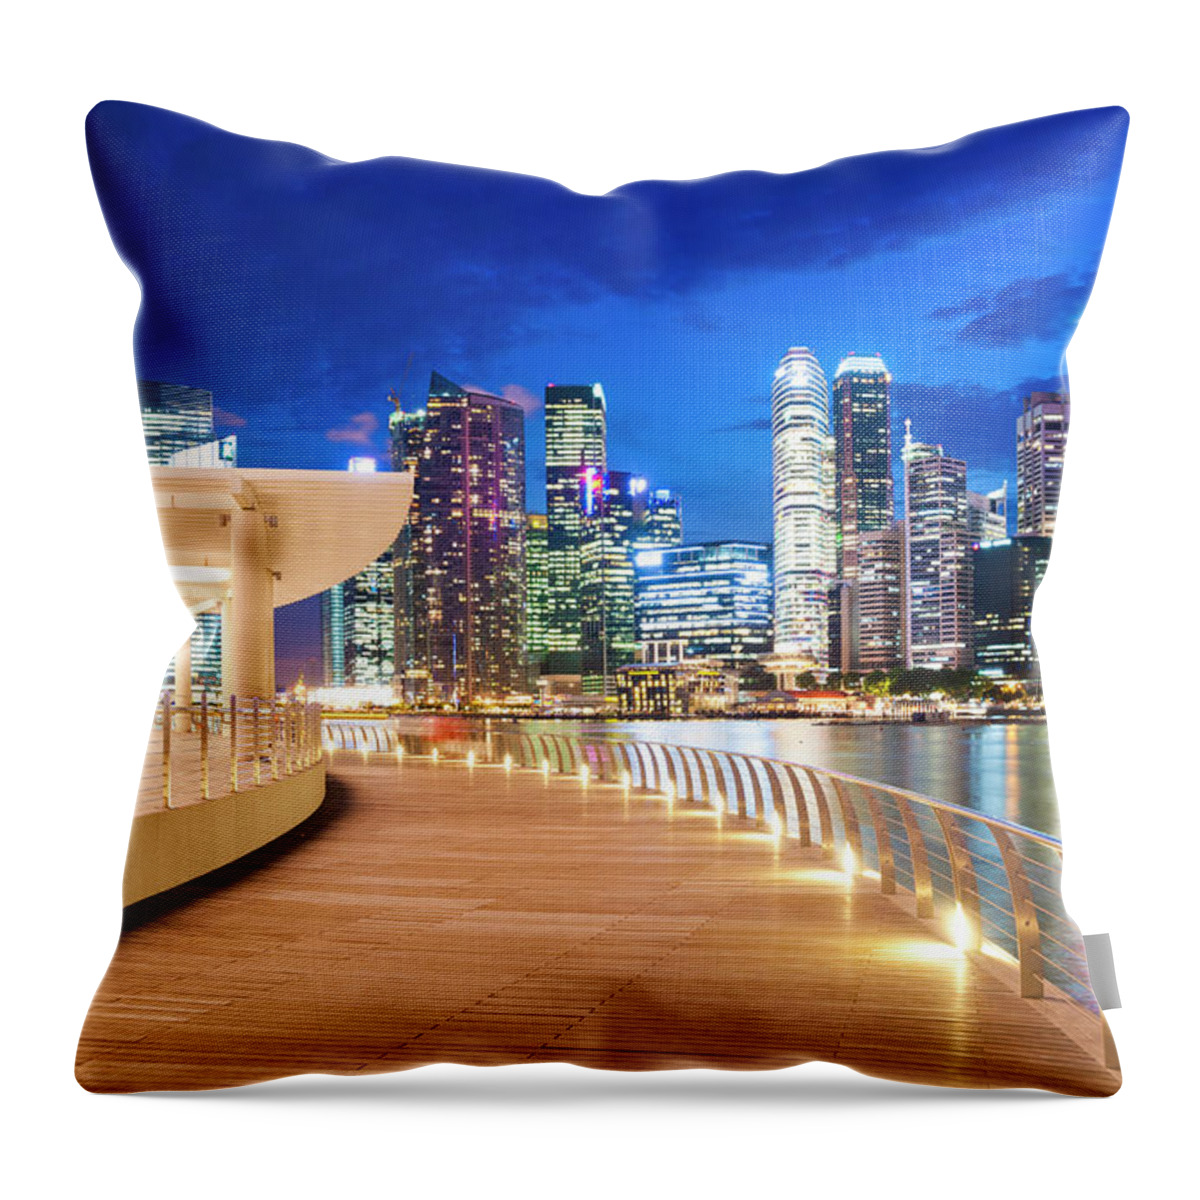 Downtown District Throw Pillow featuring the photograph Marina Bay Promenade, Singapore by John Harper